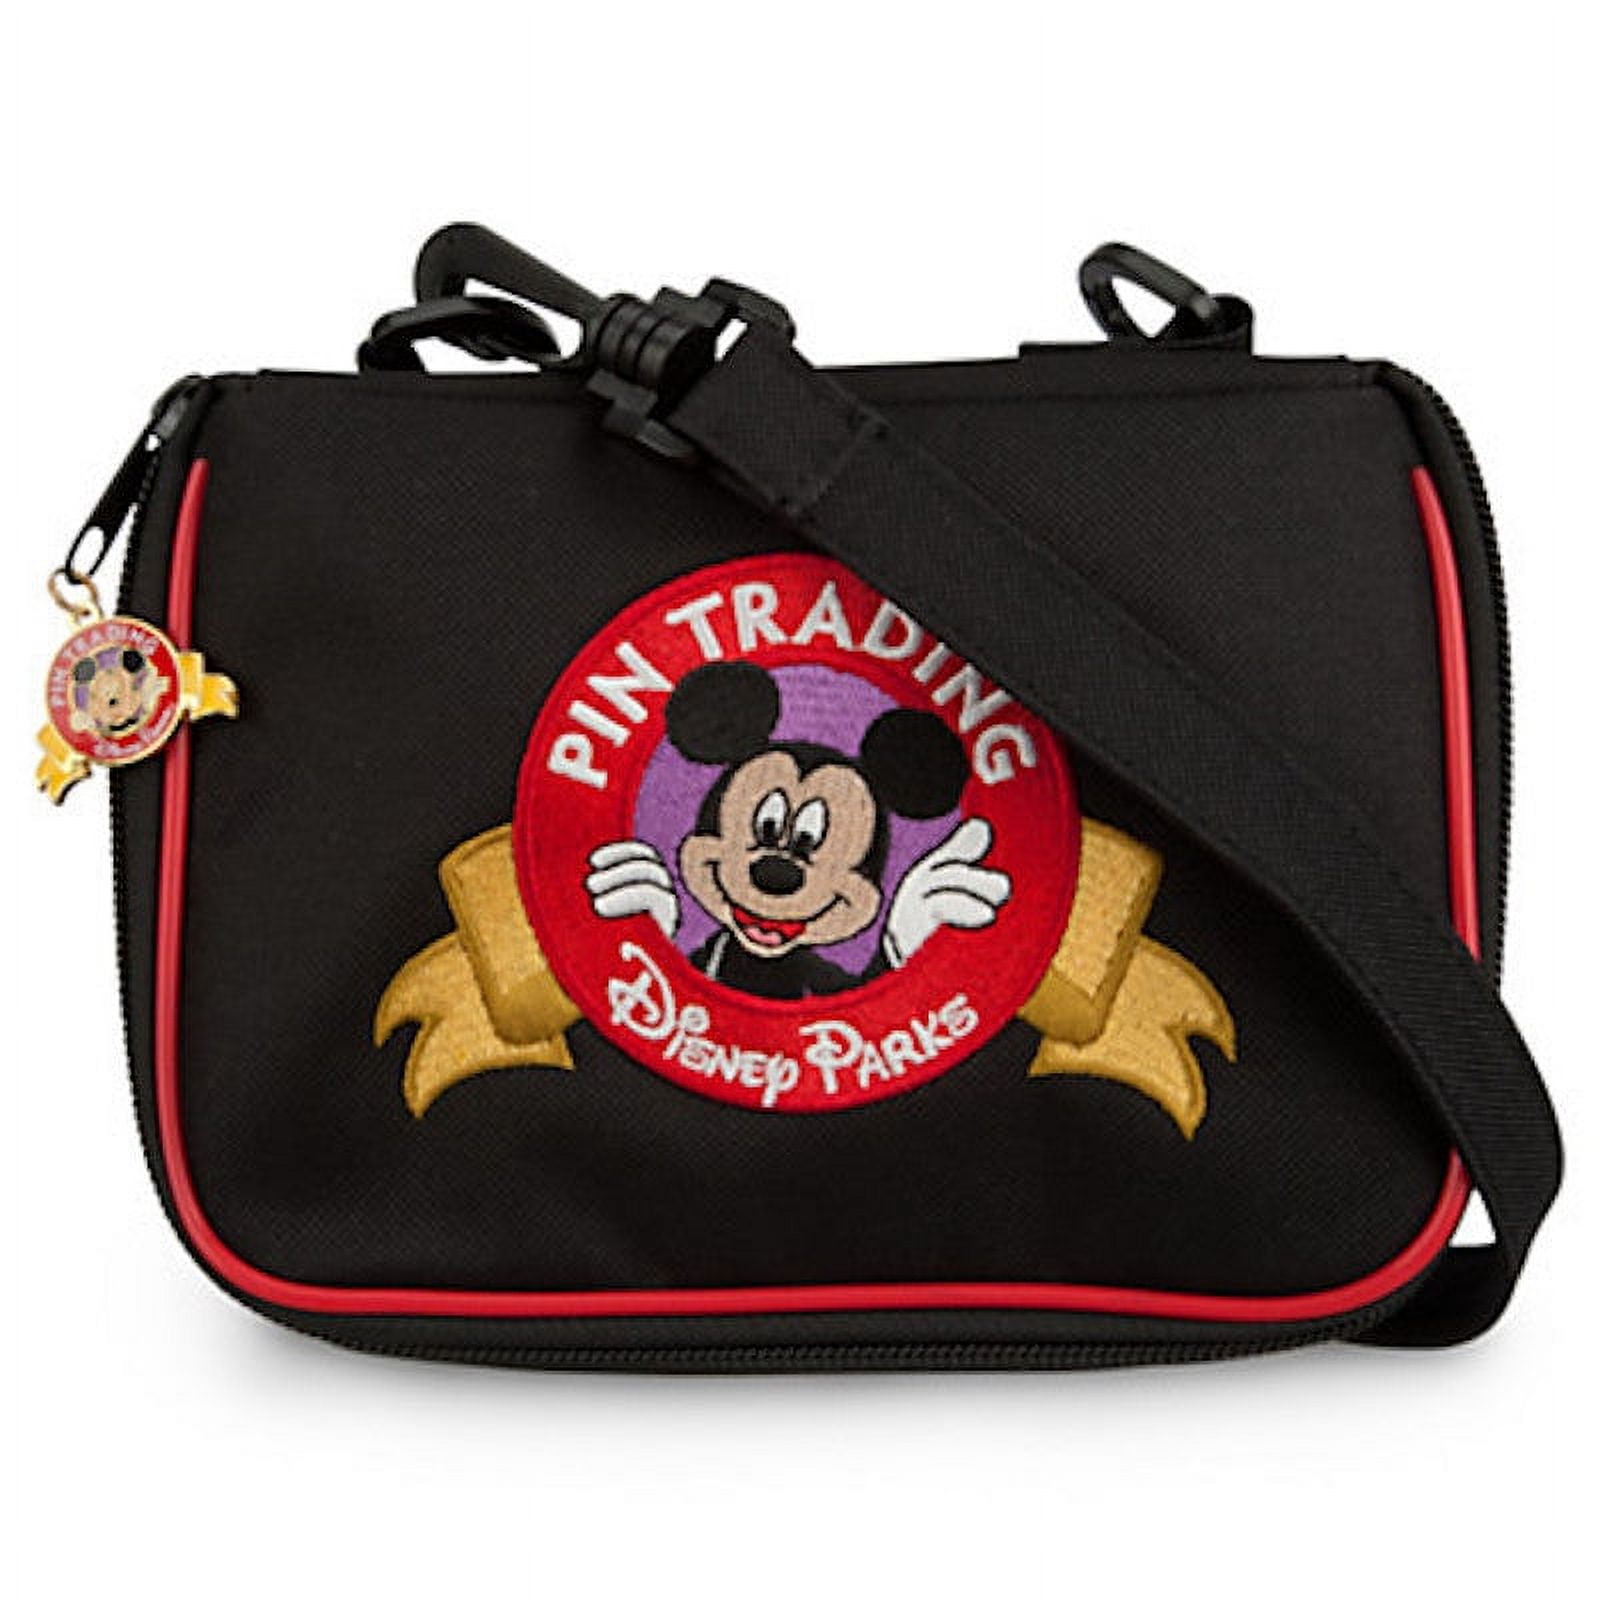 TRADING PIN BOOK FOR DISNEY PINS MICKEY MOUSE LARGE DISPLAY CASE bag